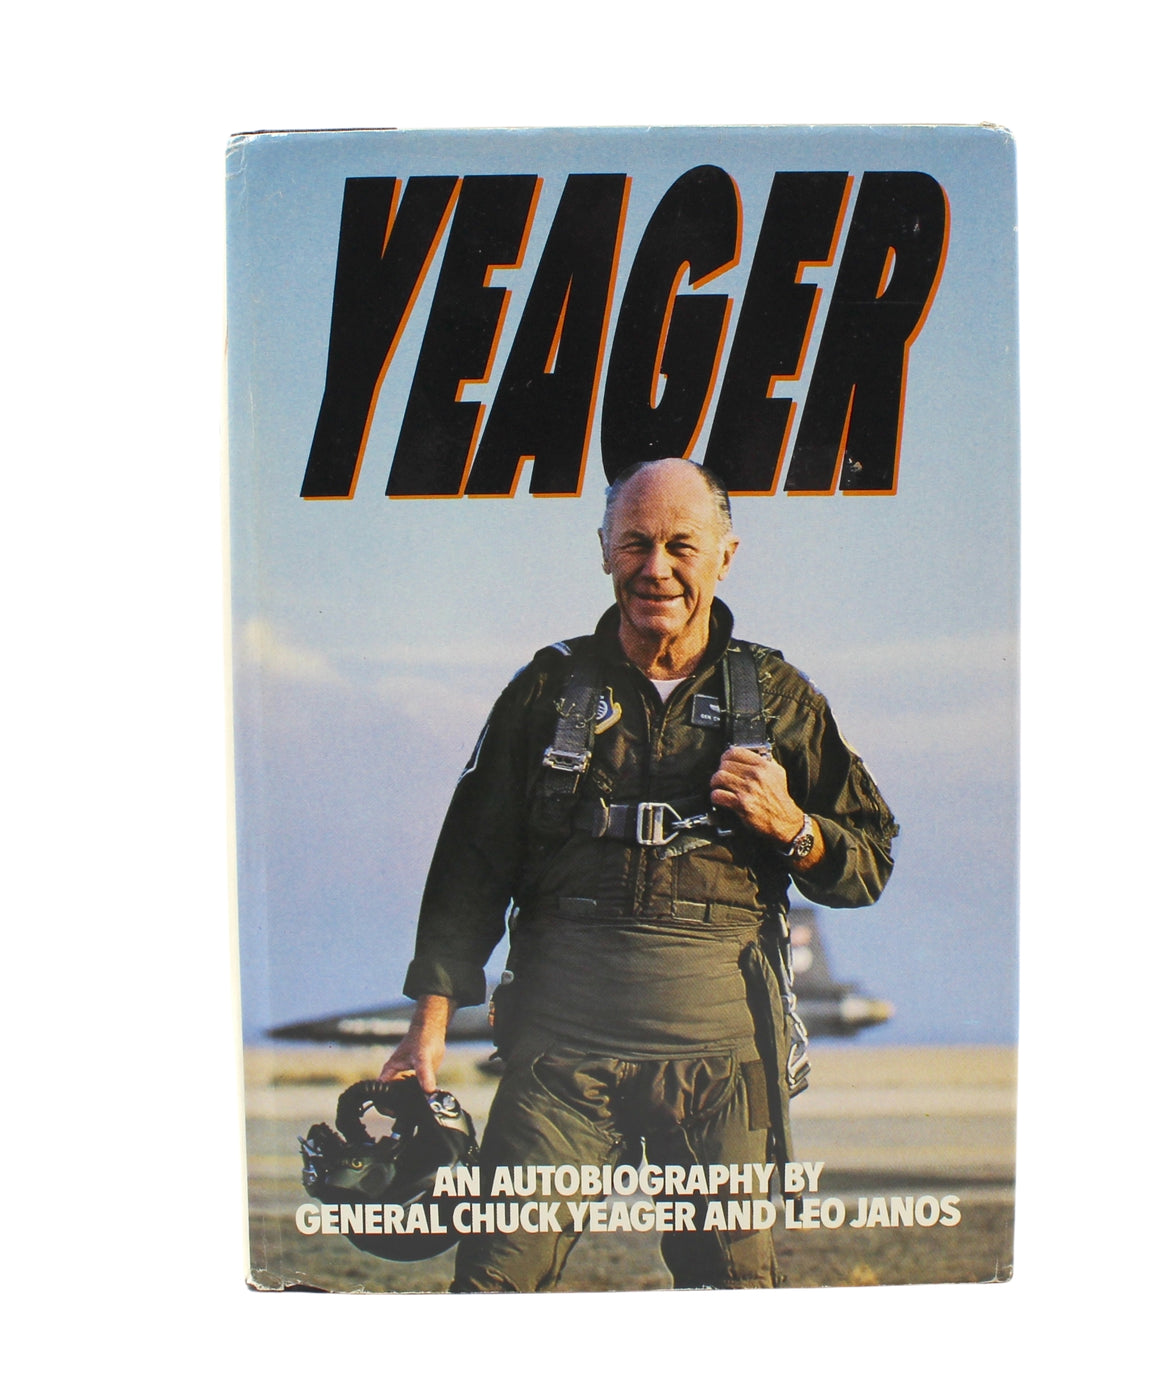 Yeager, An Autobiography by Chuck Yeager and Leo Janos, Signed by Chuck Yeager, Third Edition, 1985